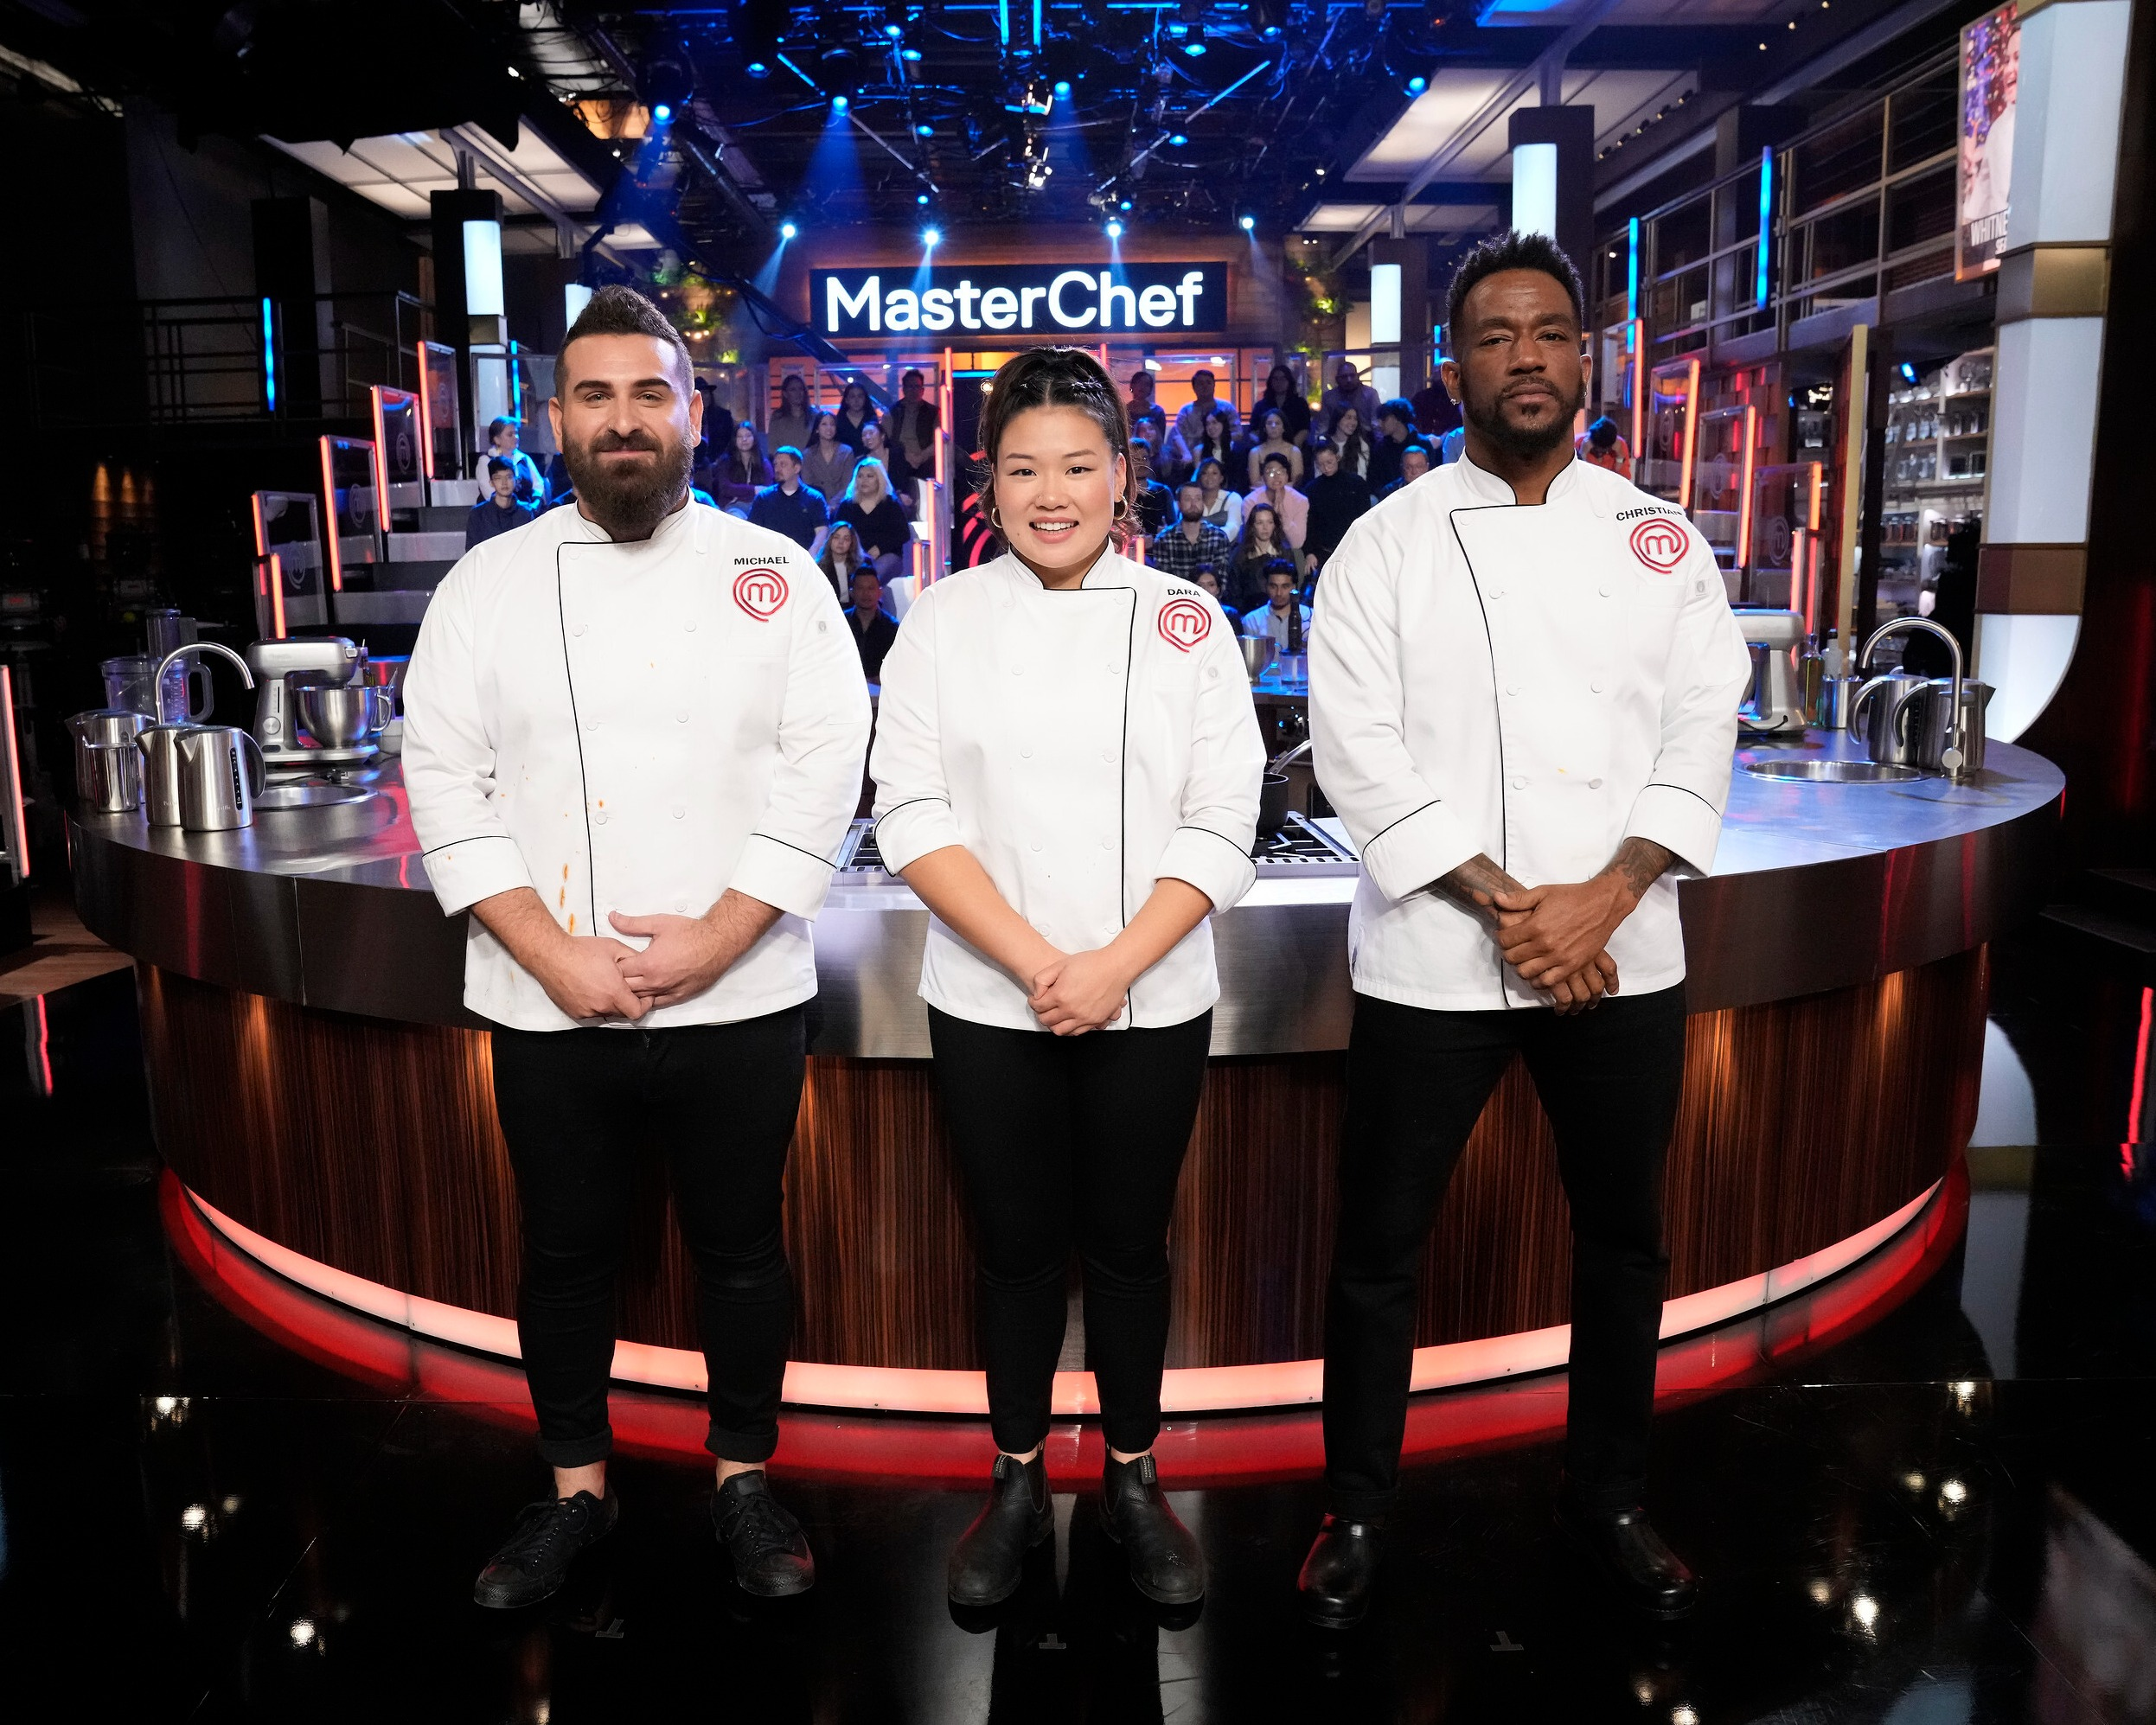 “MasterChef” heats up the competition in search of its Season 12 winner